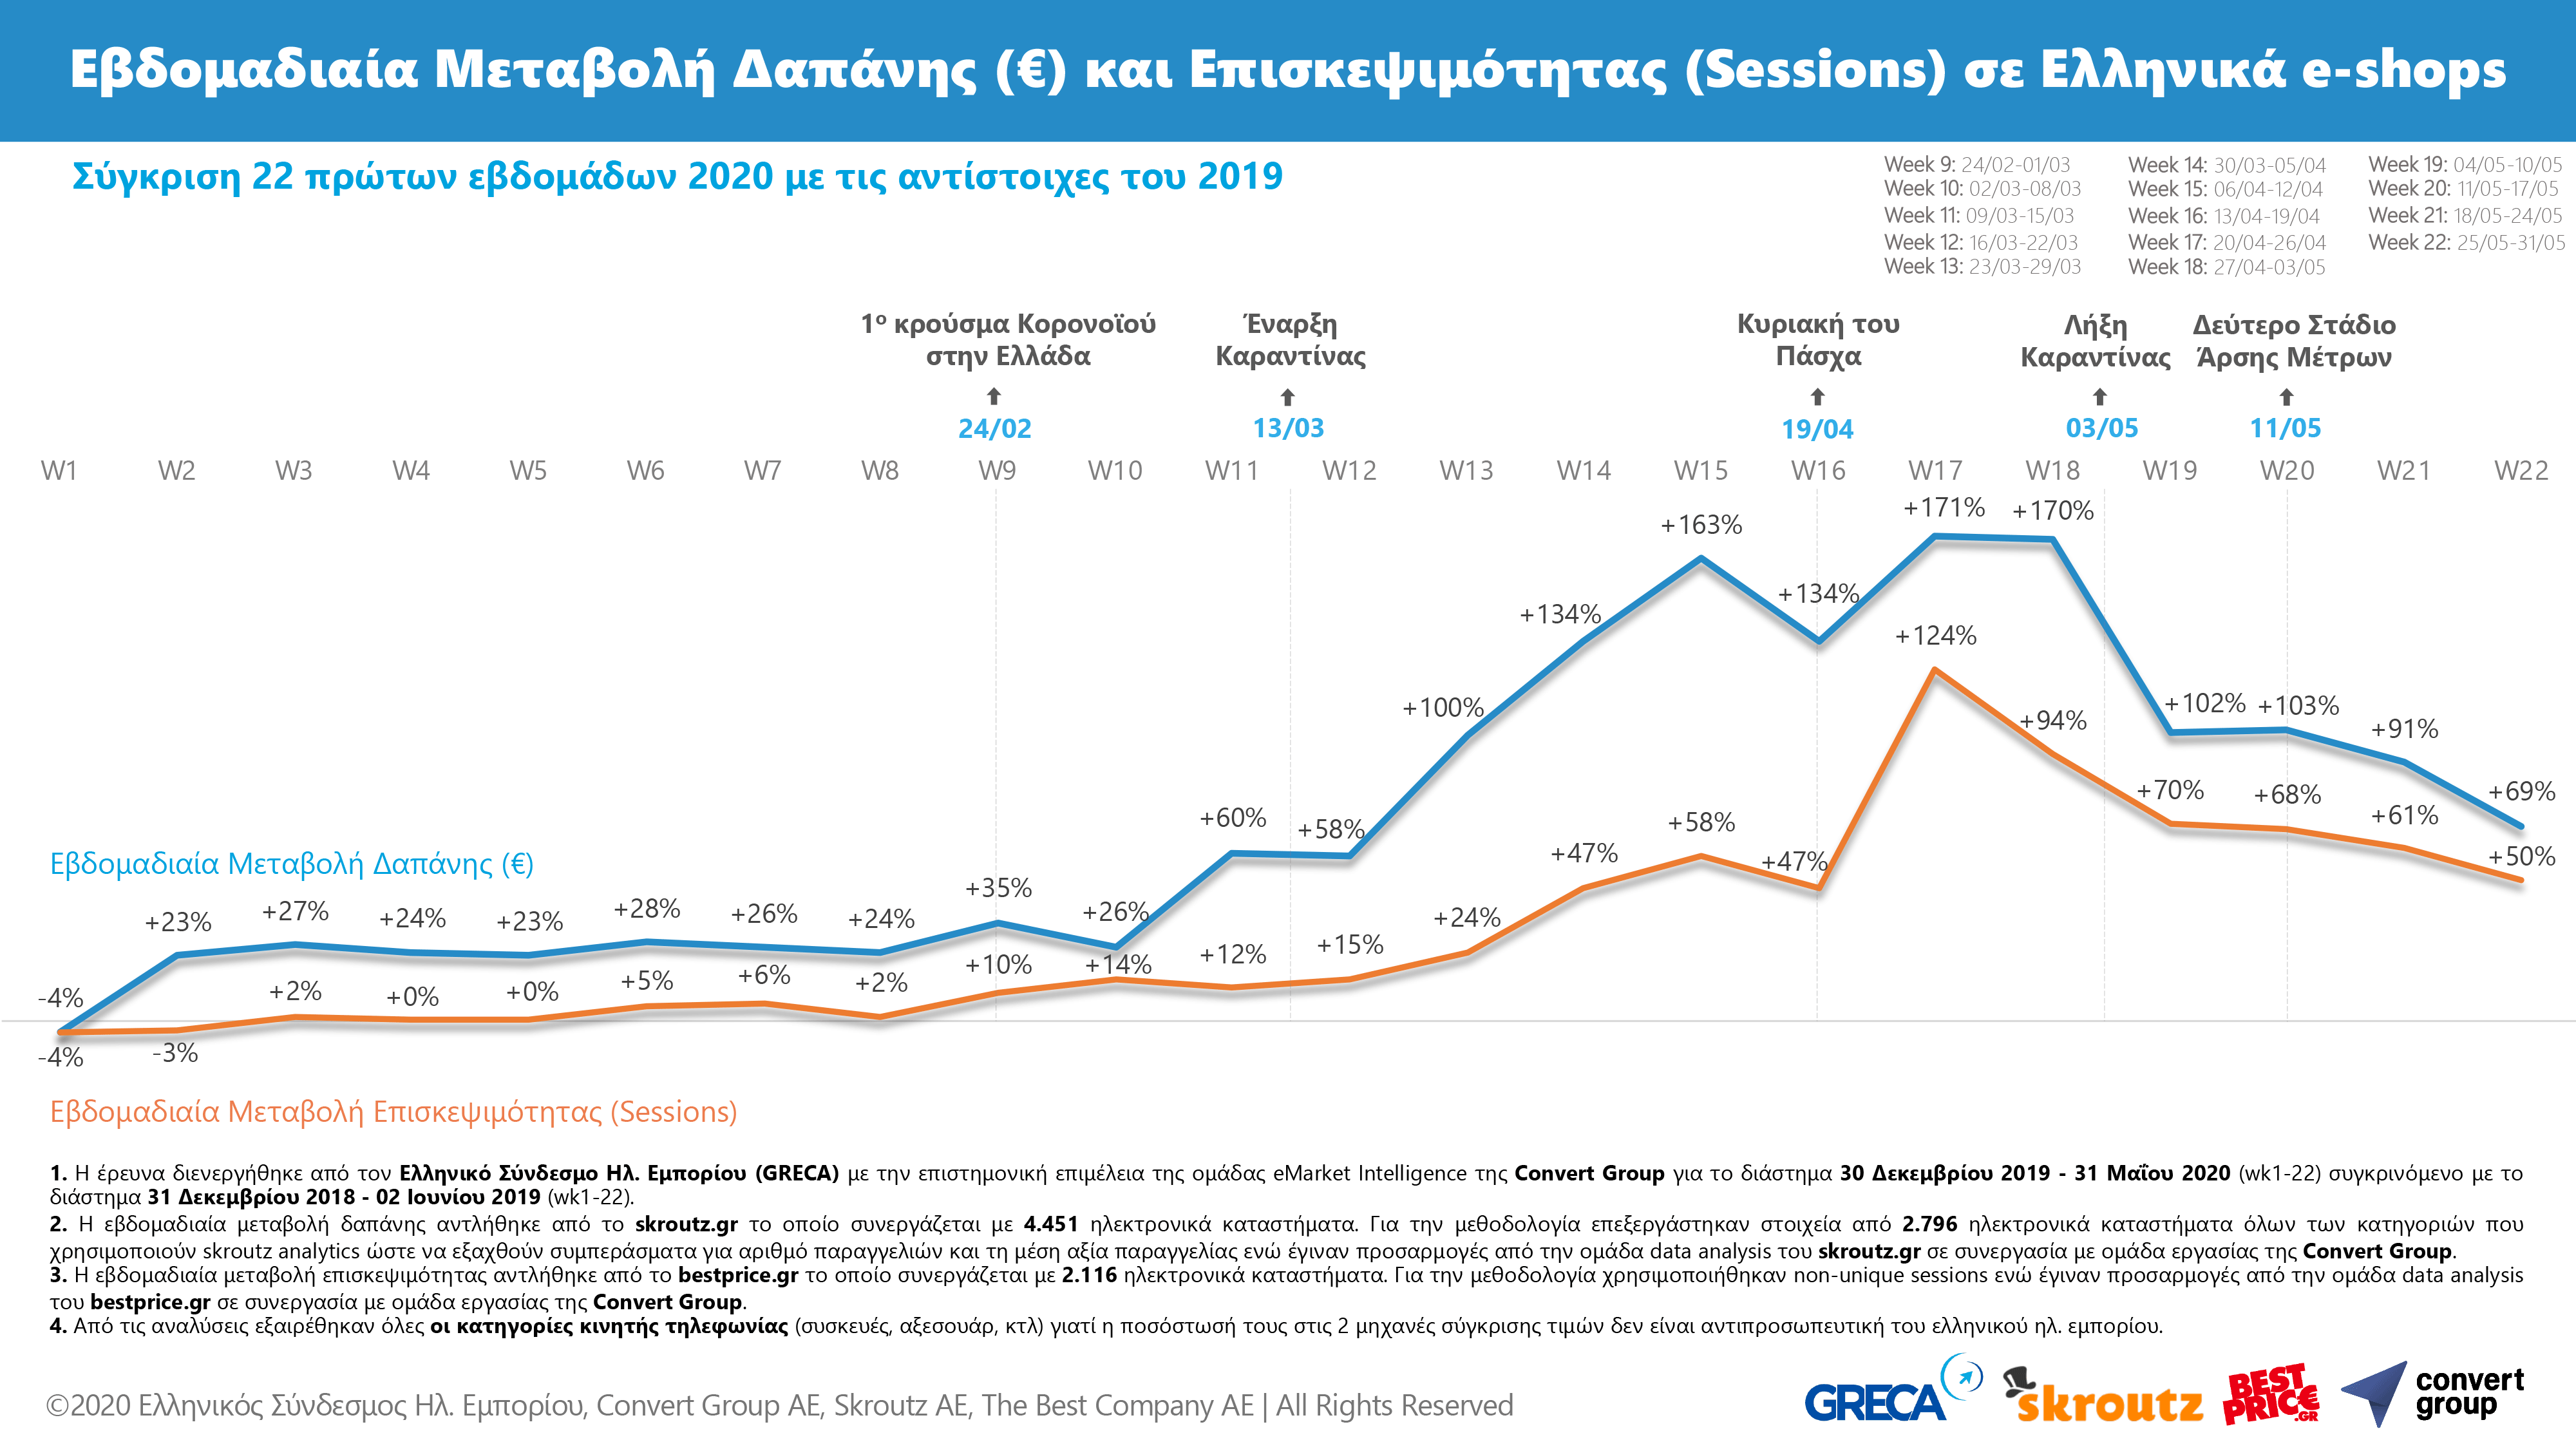 greek_ecommerce_wk22_2020_revenues_and_visits.png